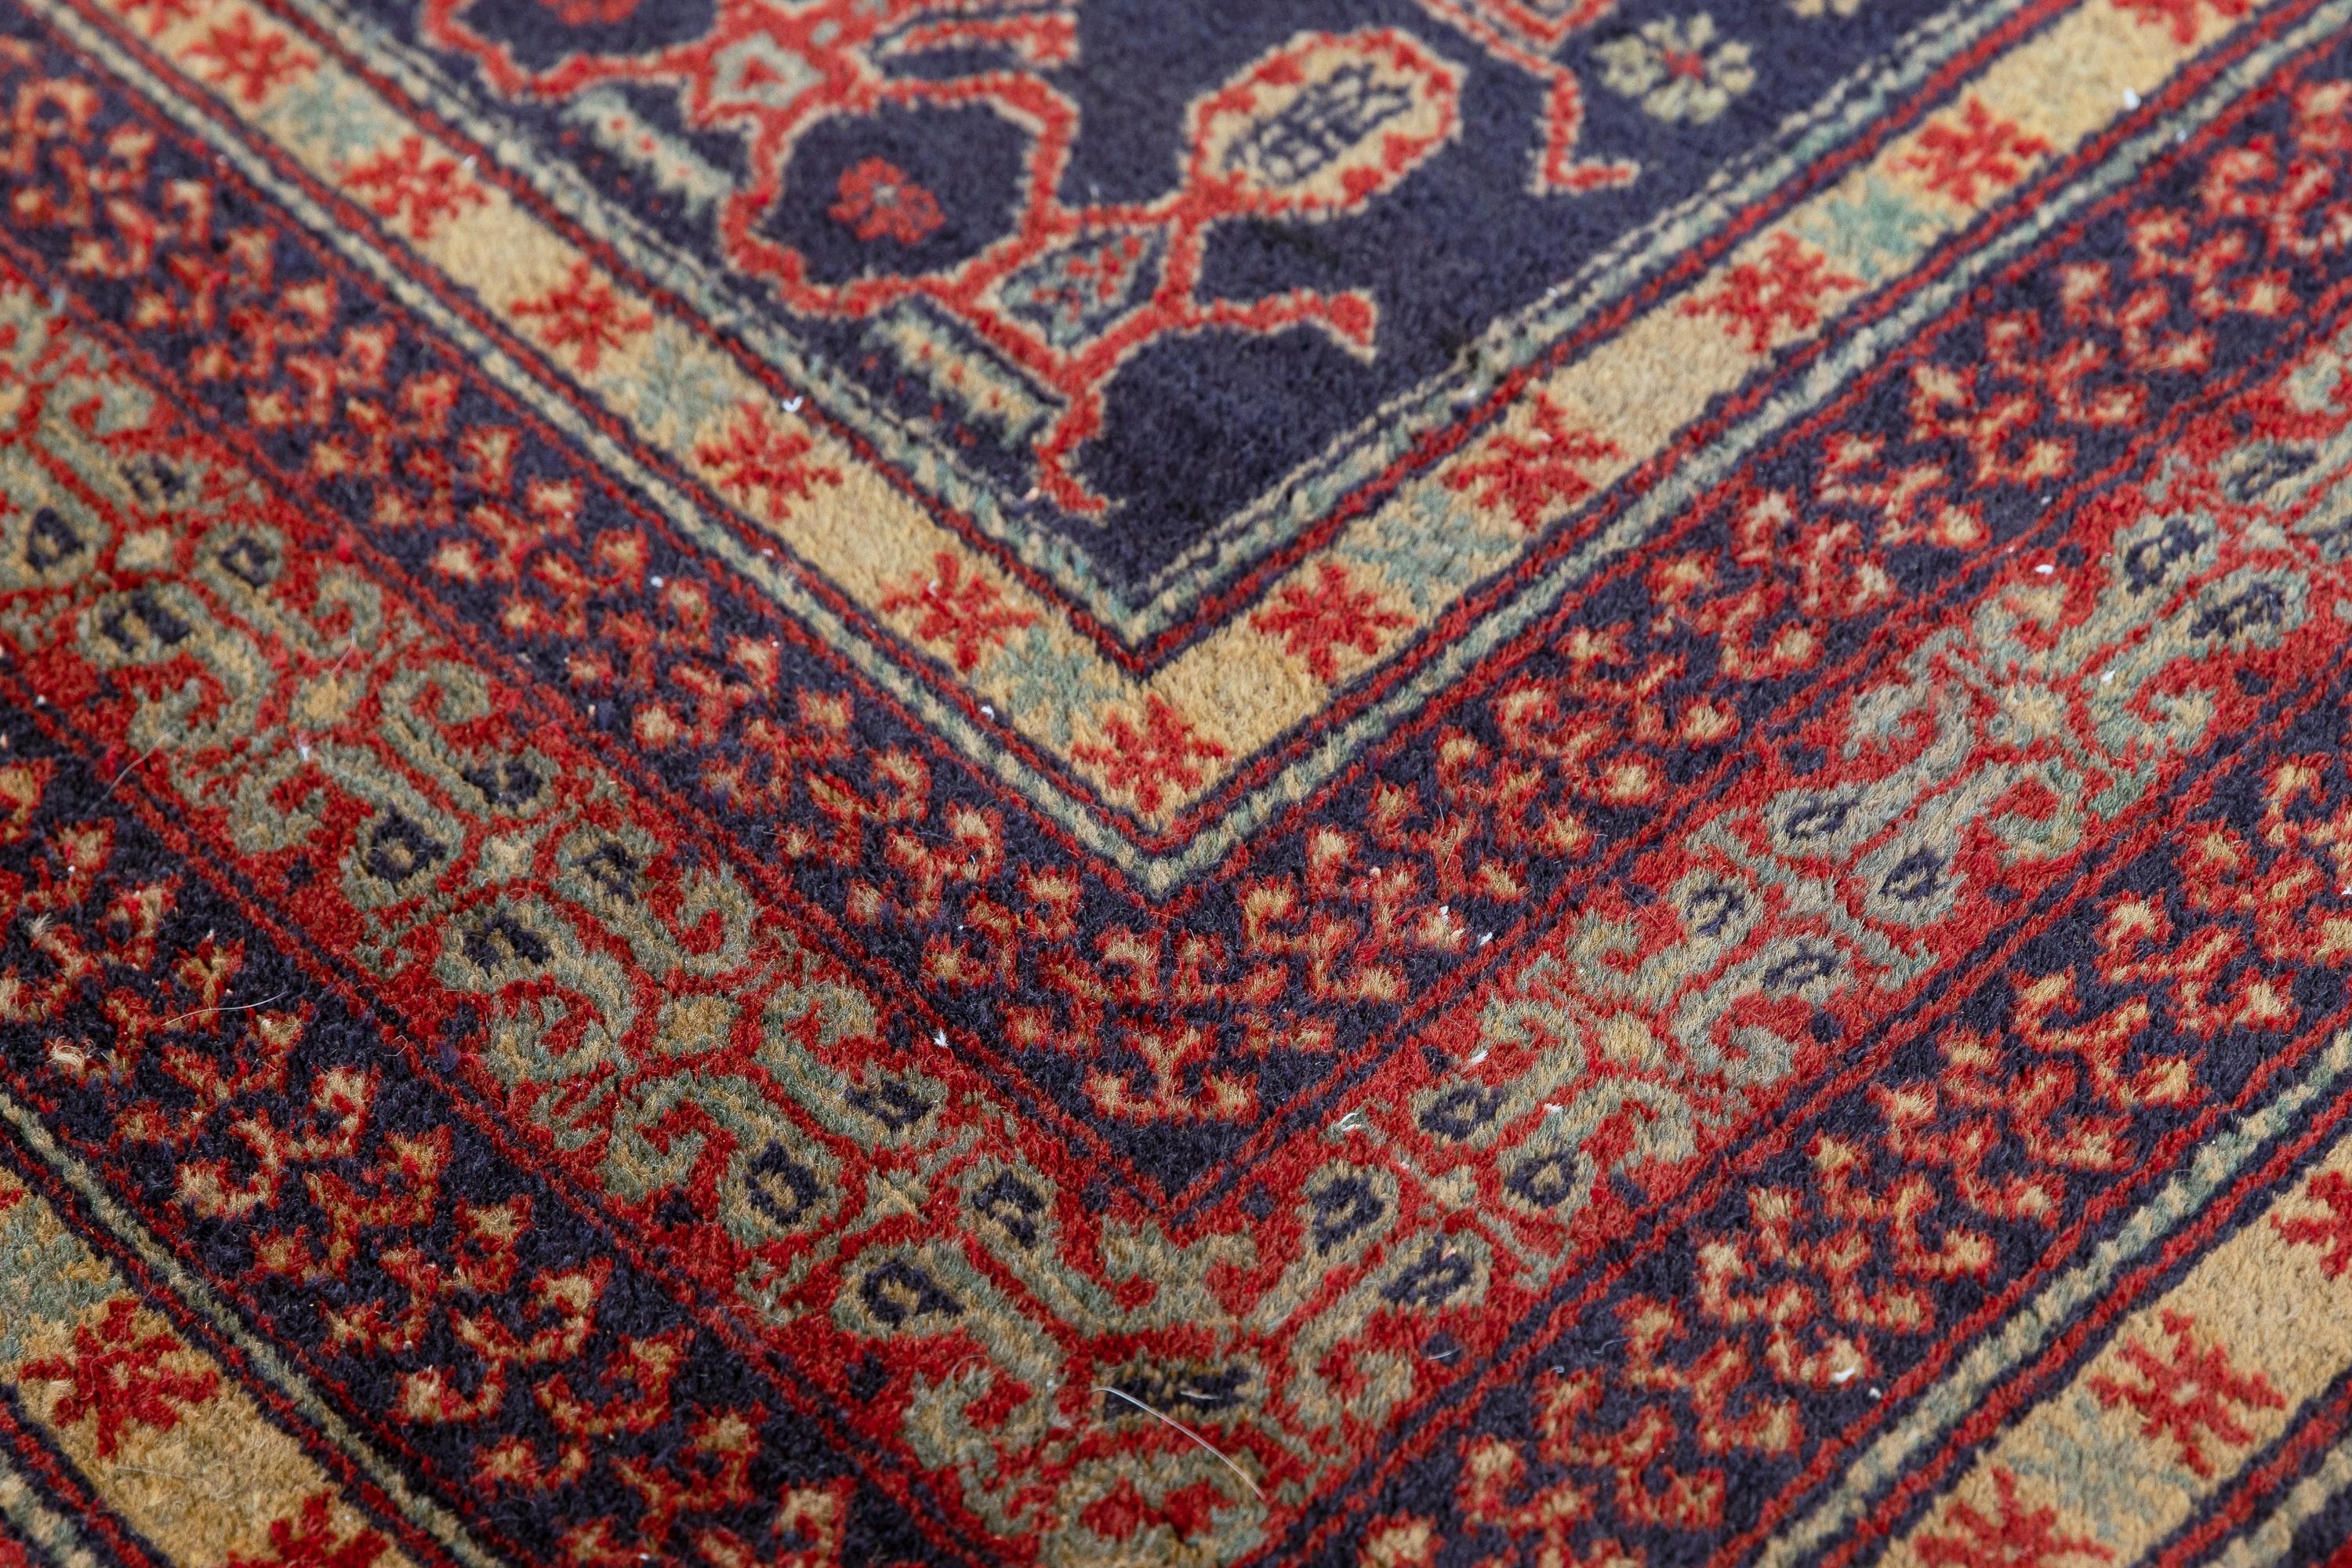 Yerevan – Souther Central Caucasian
This Yerevan rug shares the Gabistan design of the Shirvan rugs from Maraza, Azerbaijan. Human figures are depicted performing the jally dance at both ends of the rug. The navy-blue field of the carpet hosts four